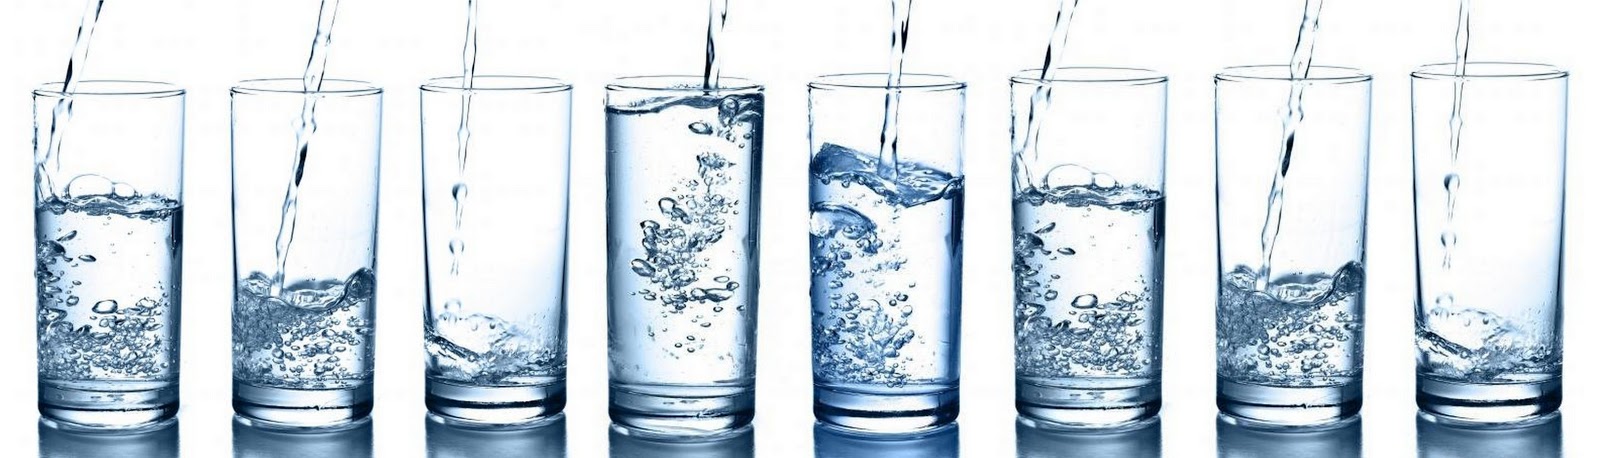 8 glasses of water a day: a myth?